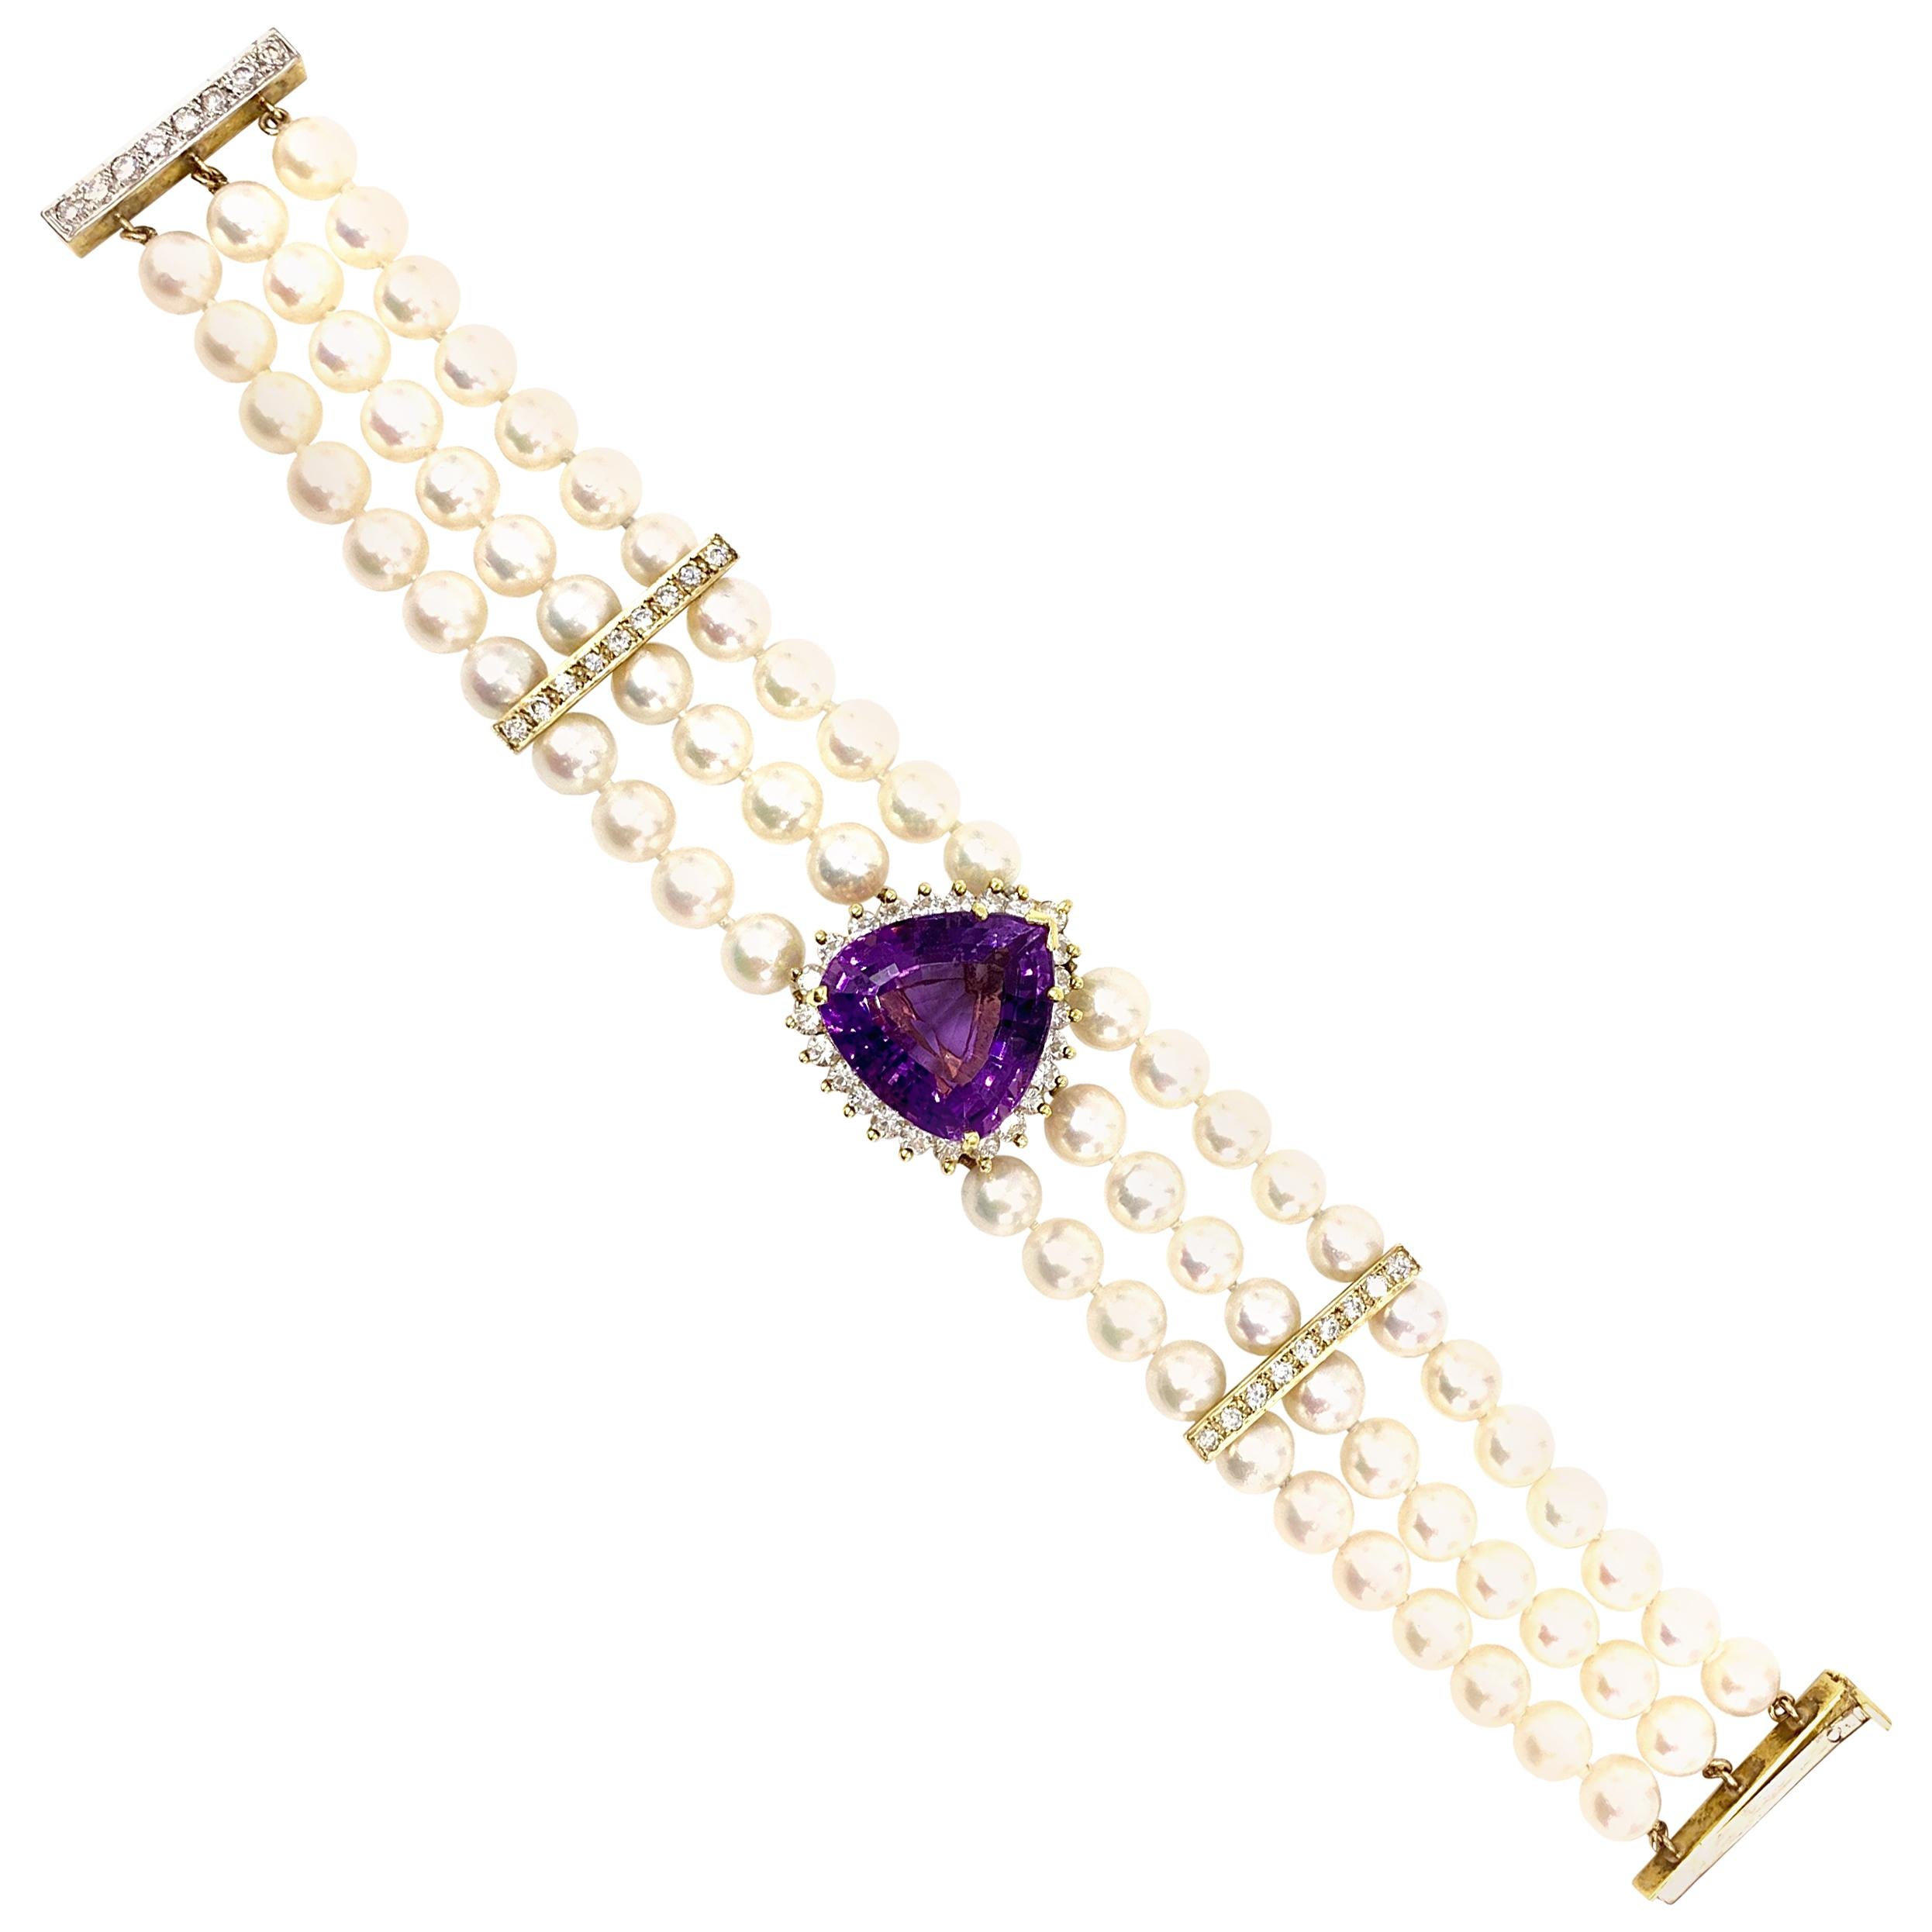 18 Karat Three-Strand Pearl Bracelet with Amethyst and Diamond Center For Sale